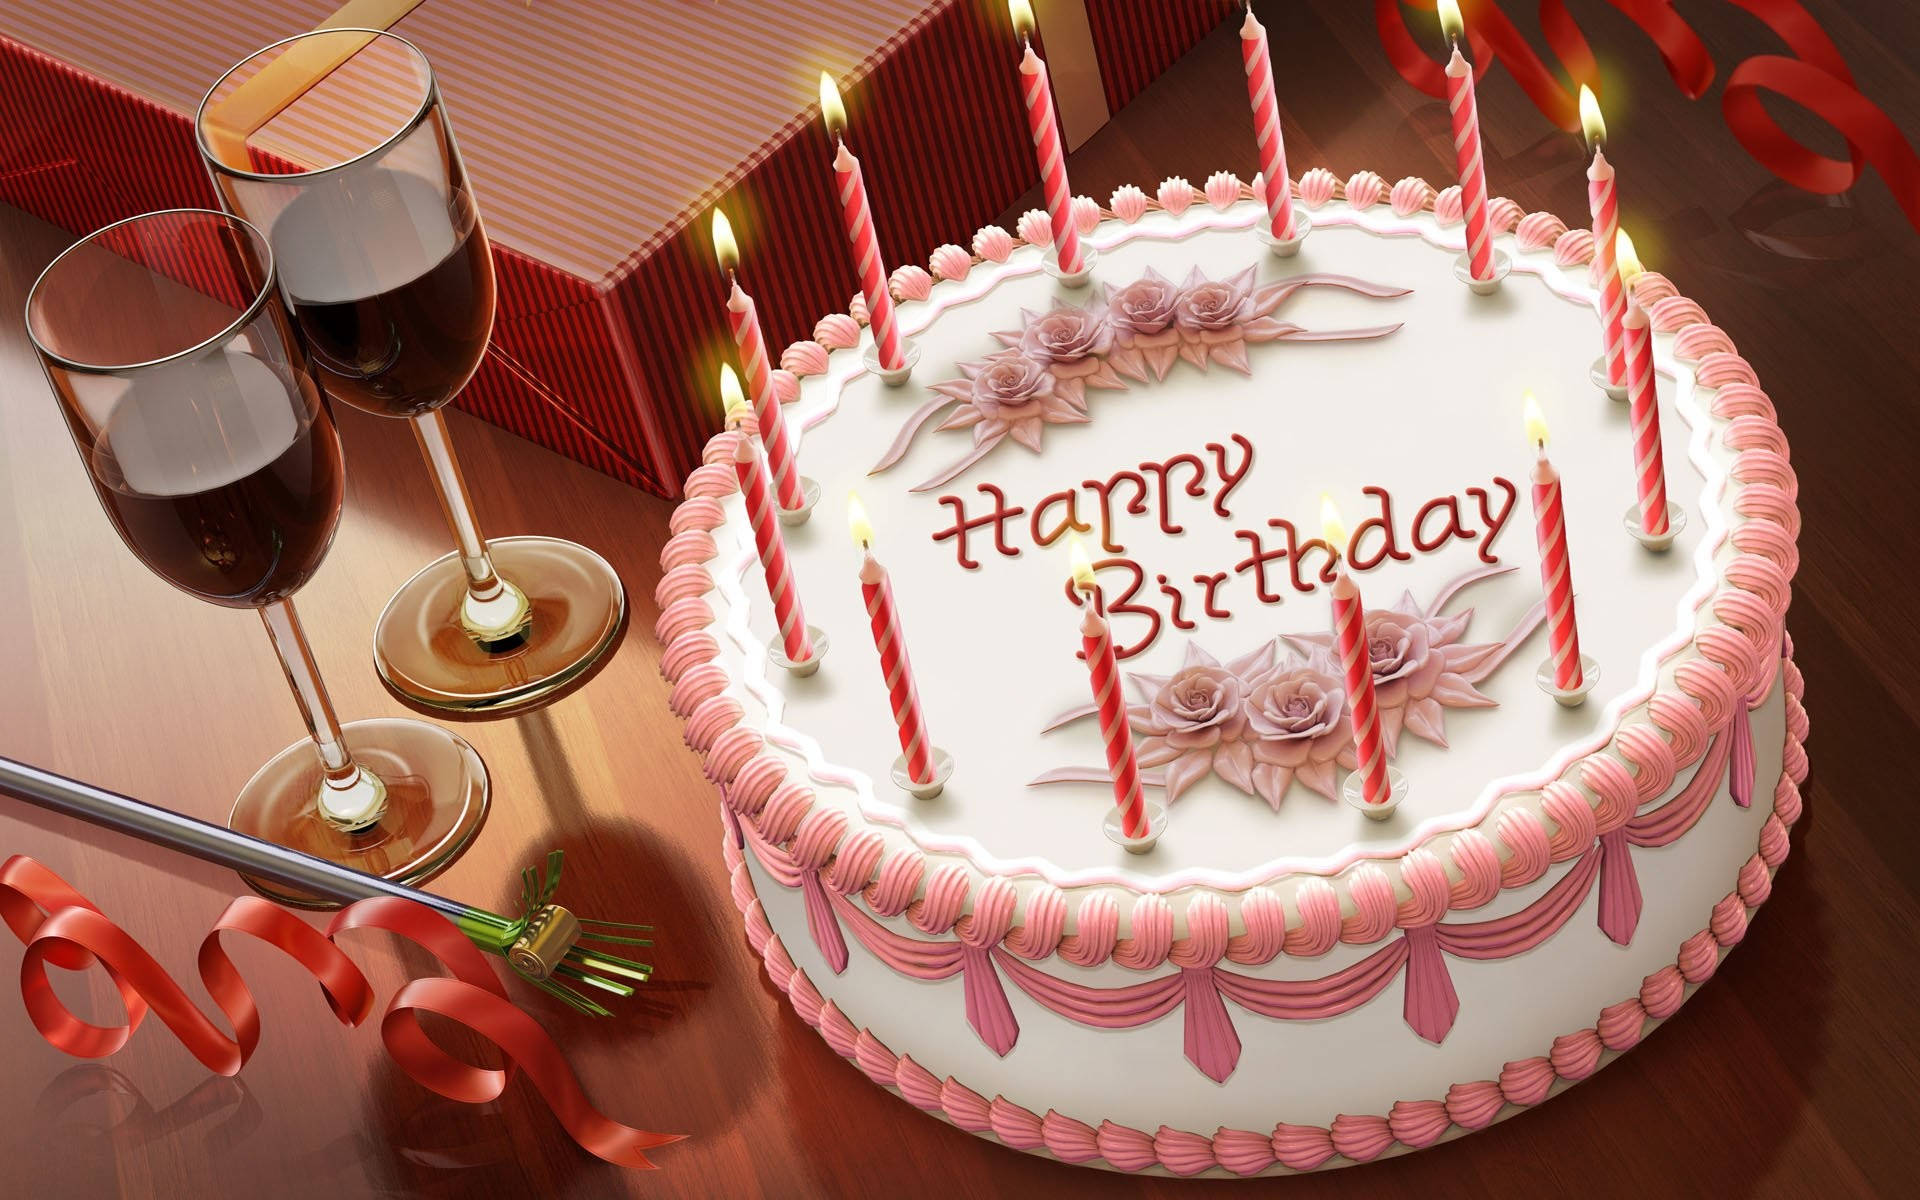 Festive Birthday Cake Illuminated by Candles with Red Wine Wallpaper